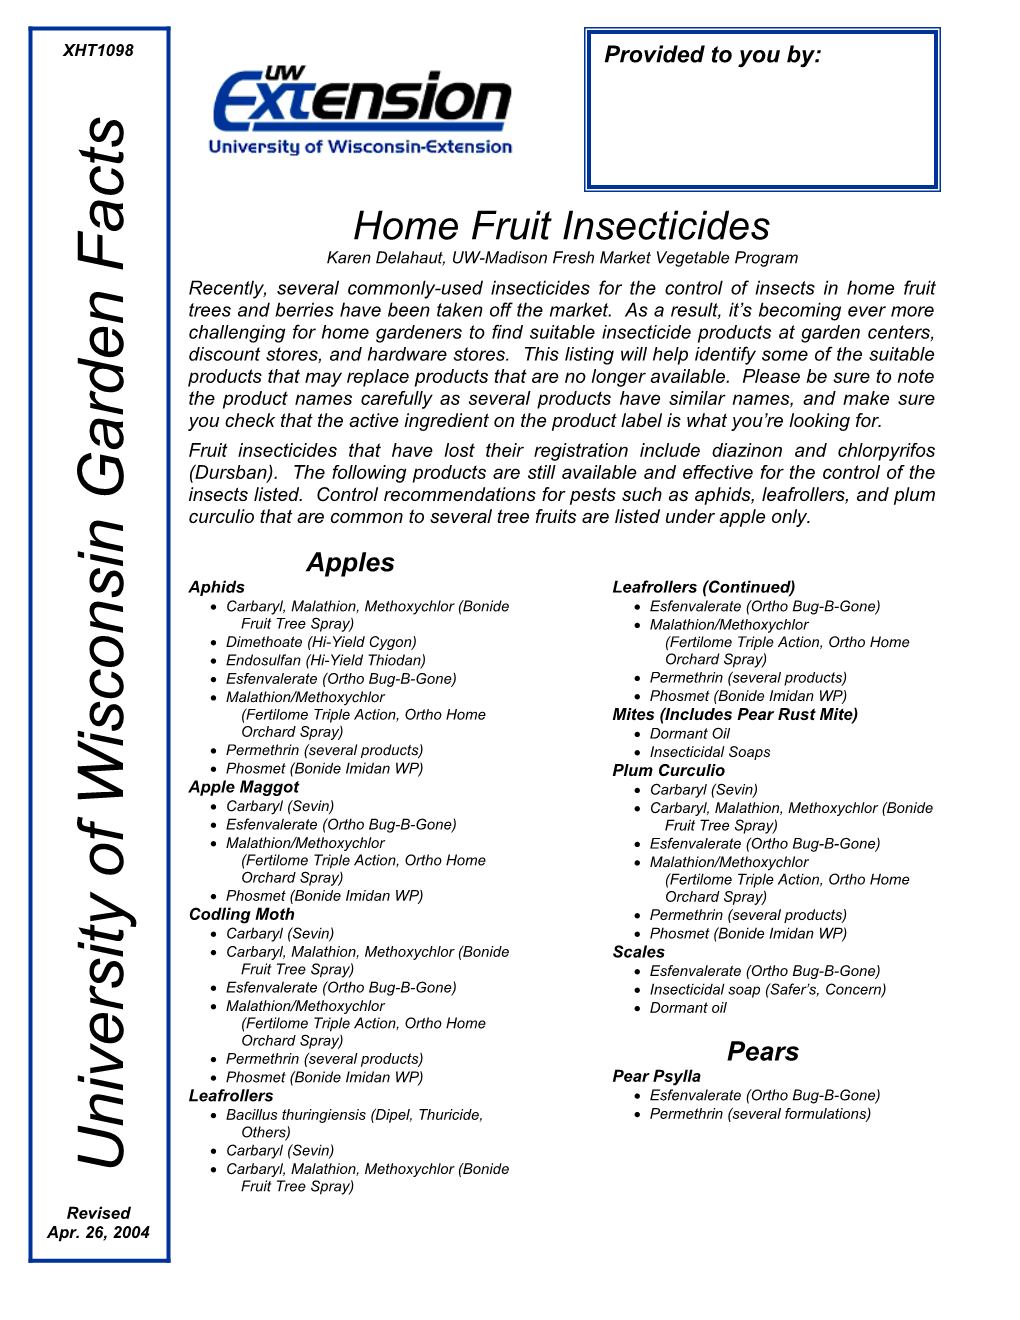 Home Fruit Insecticides